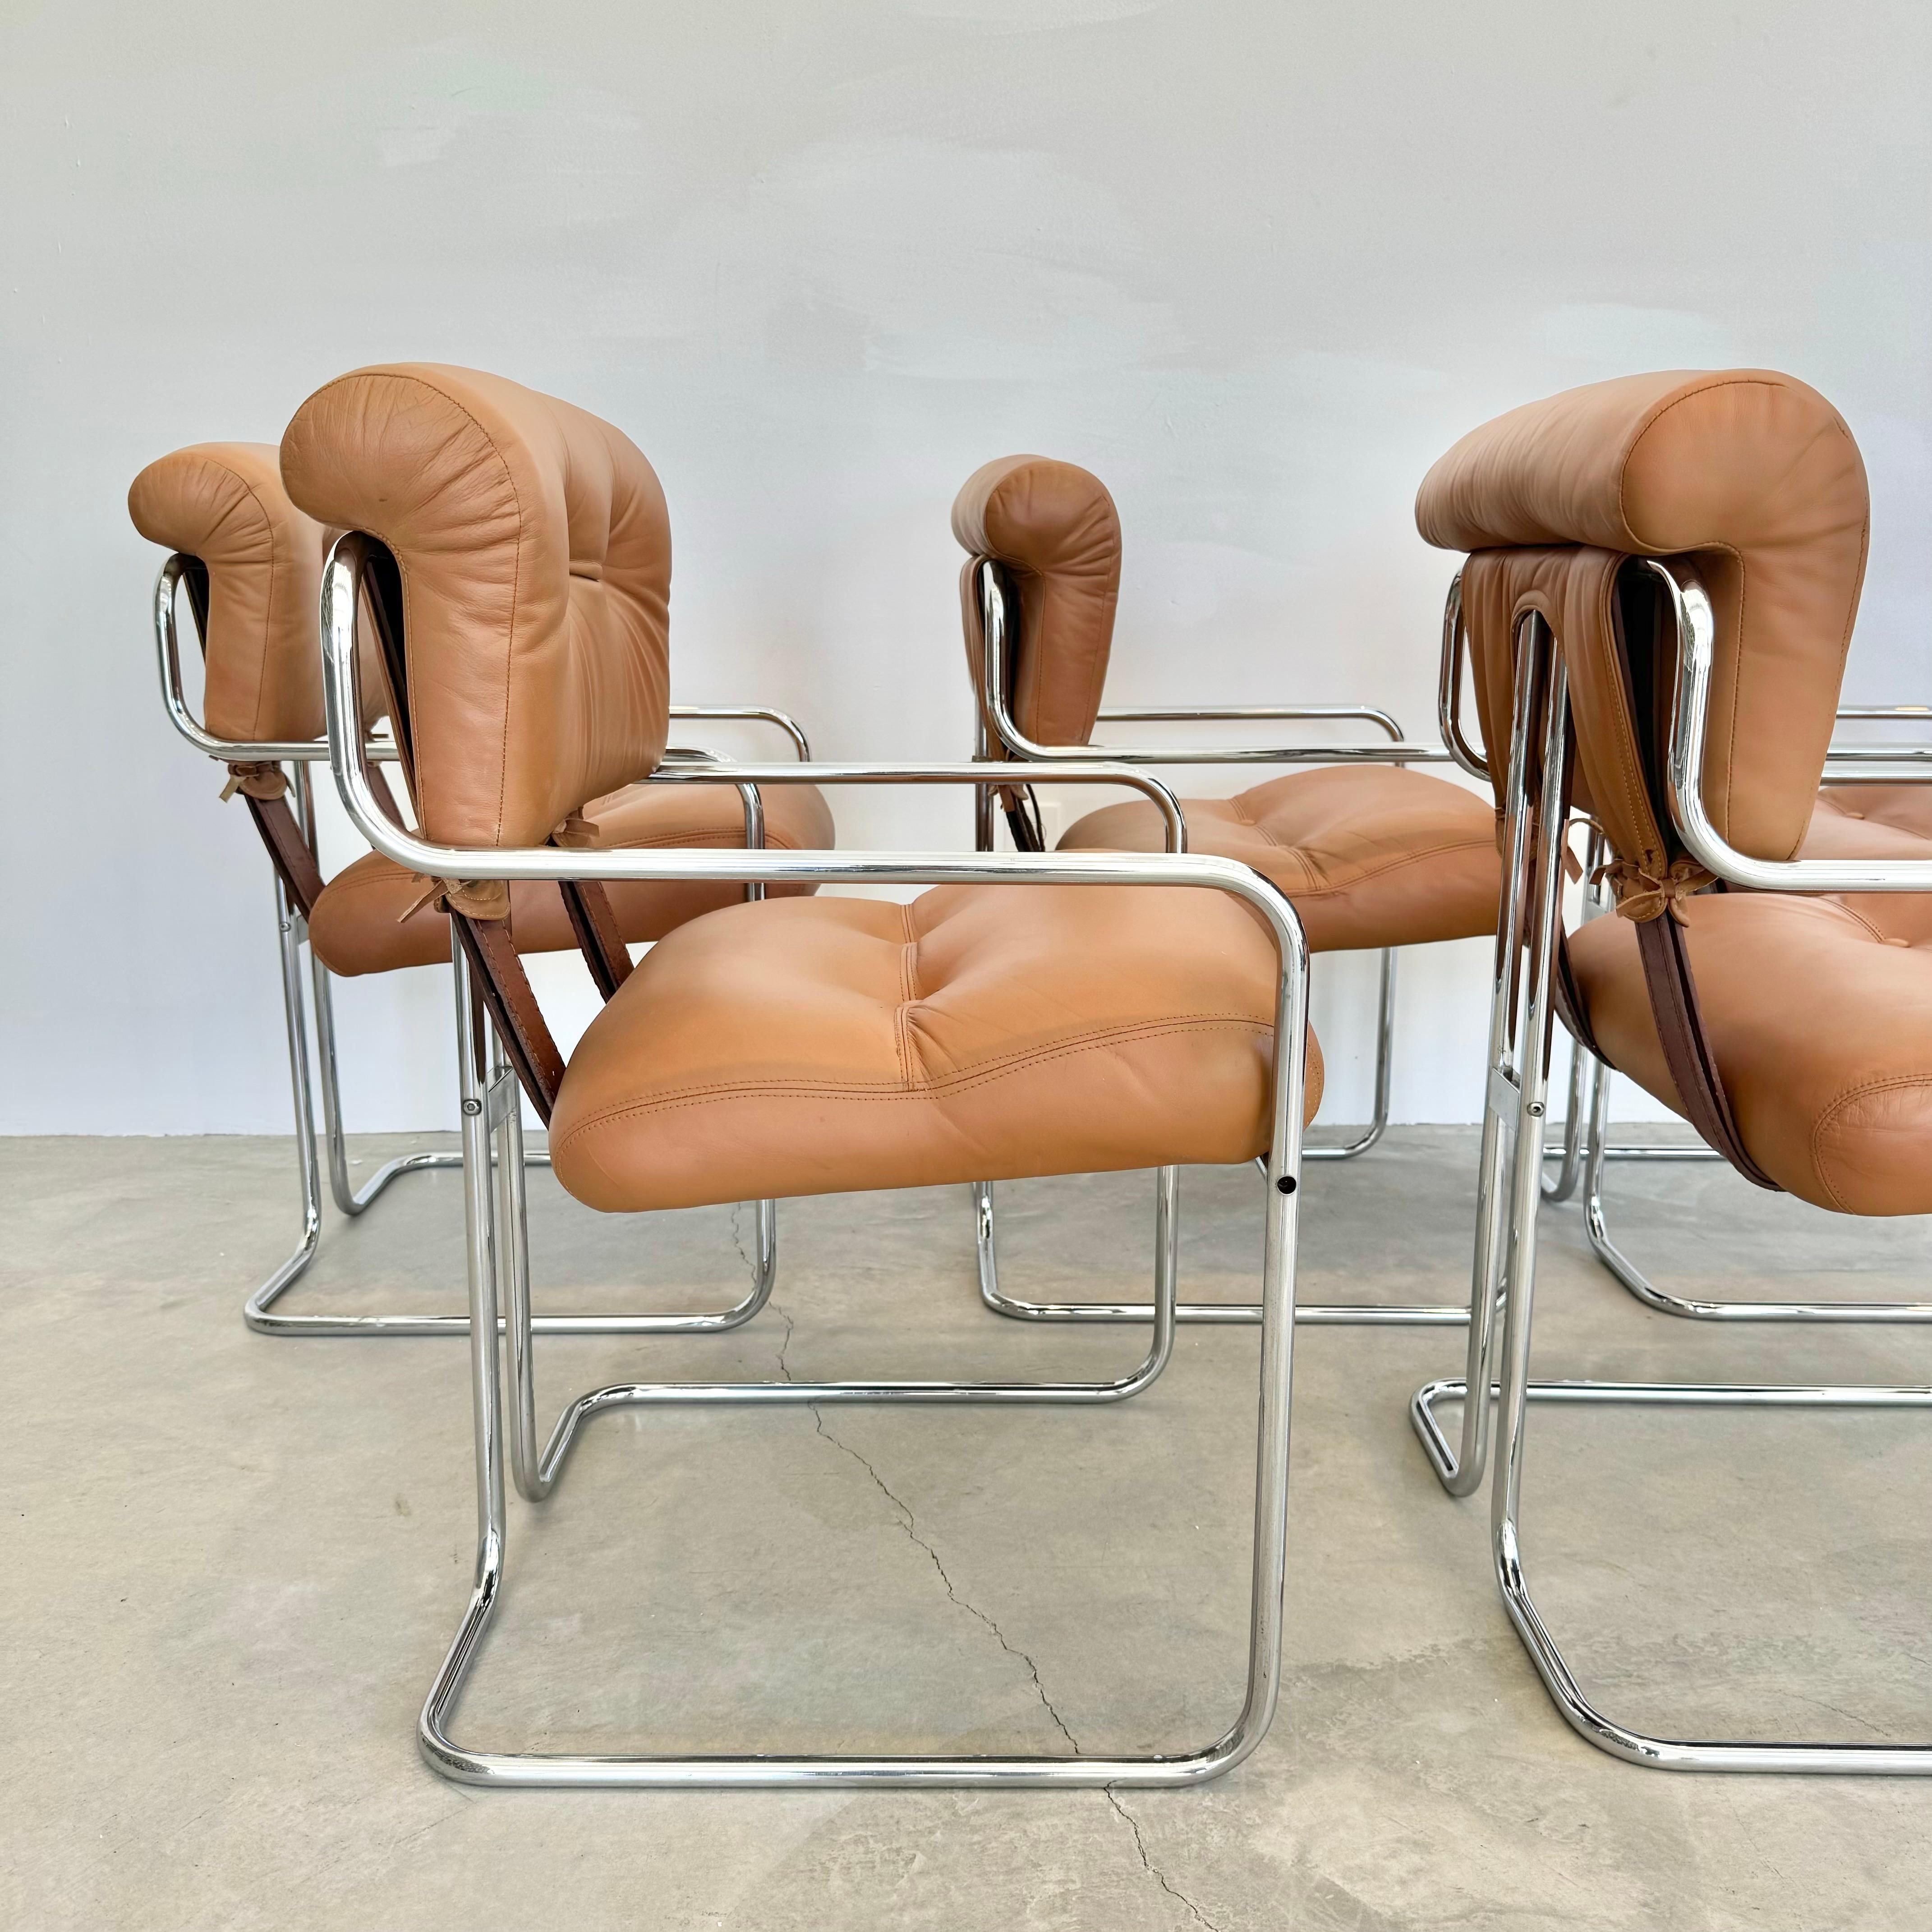 Set of 6 'Tucroma' Chairs in Tan by Guido Faleschini, 1970s Italy For Sale 6